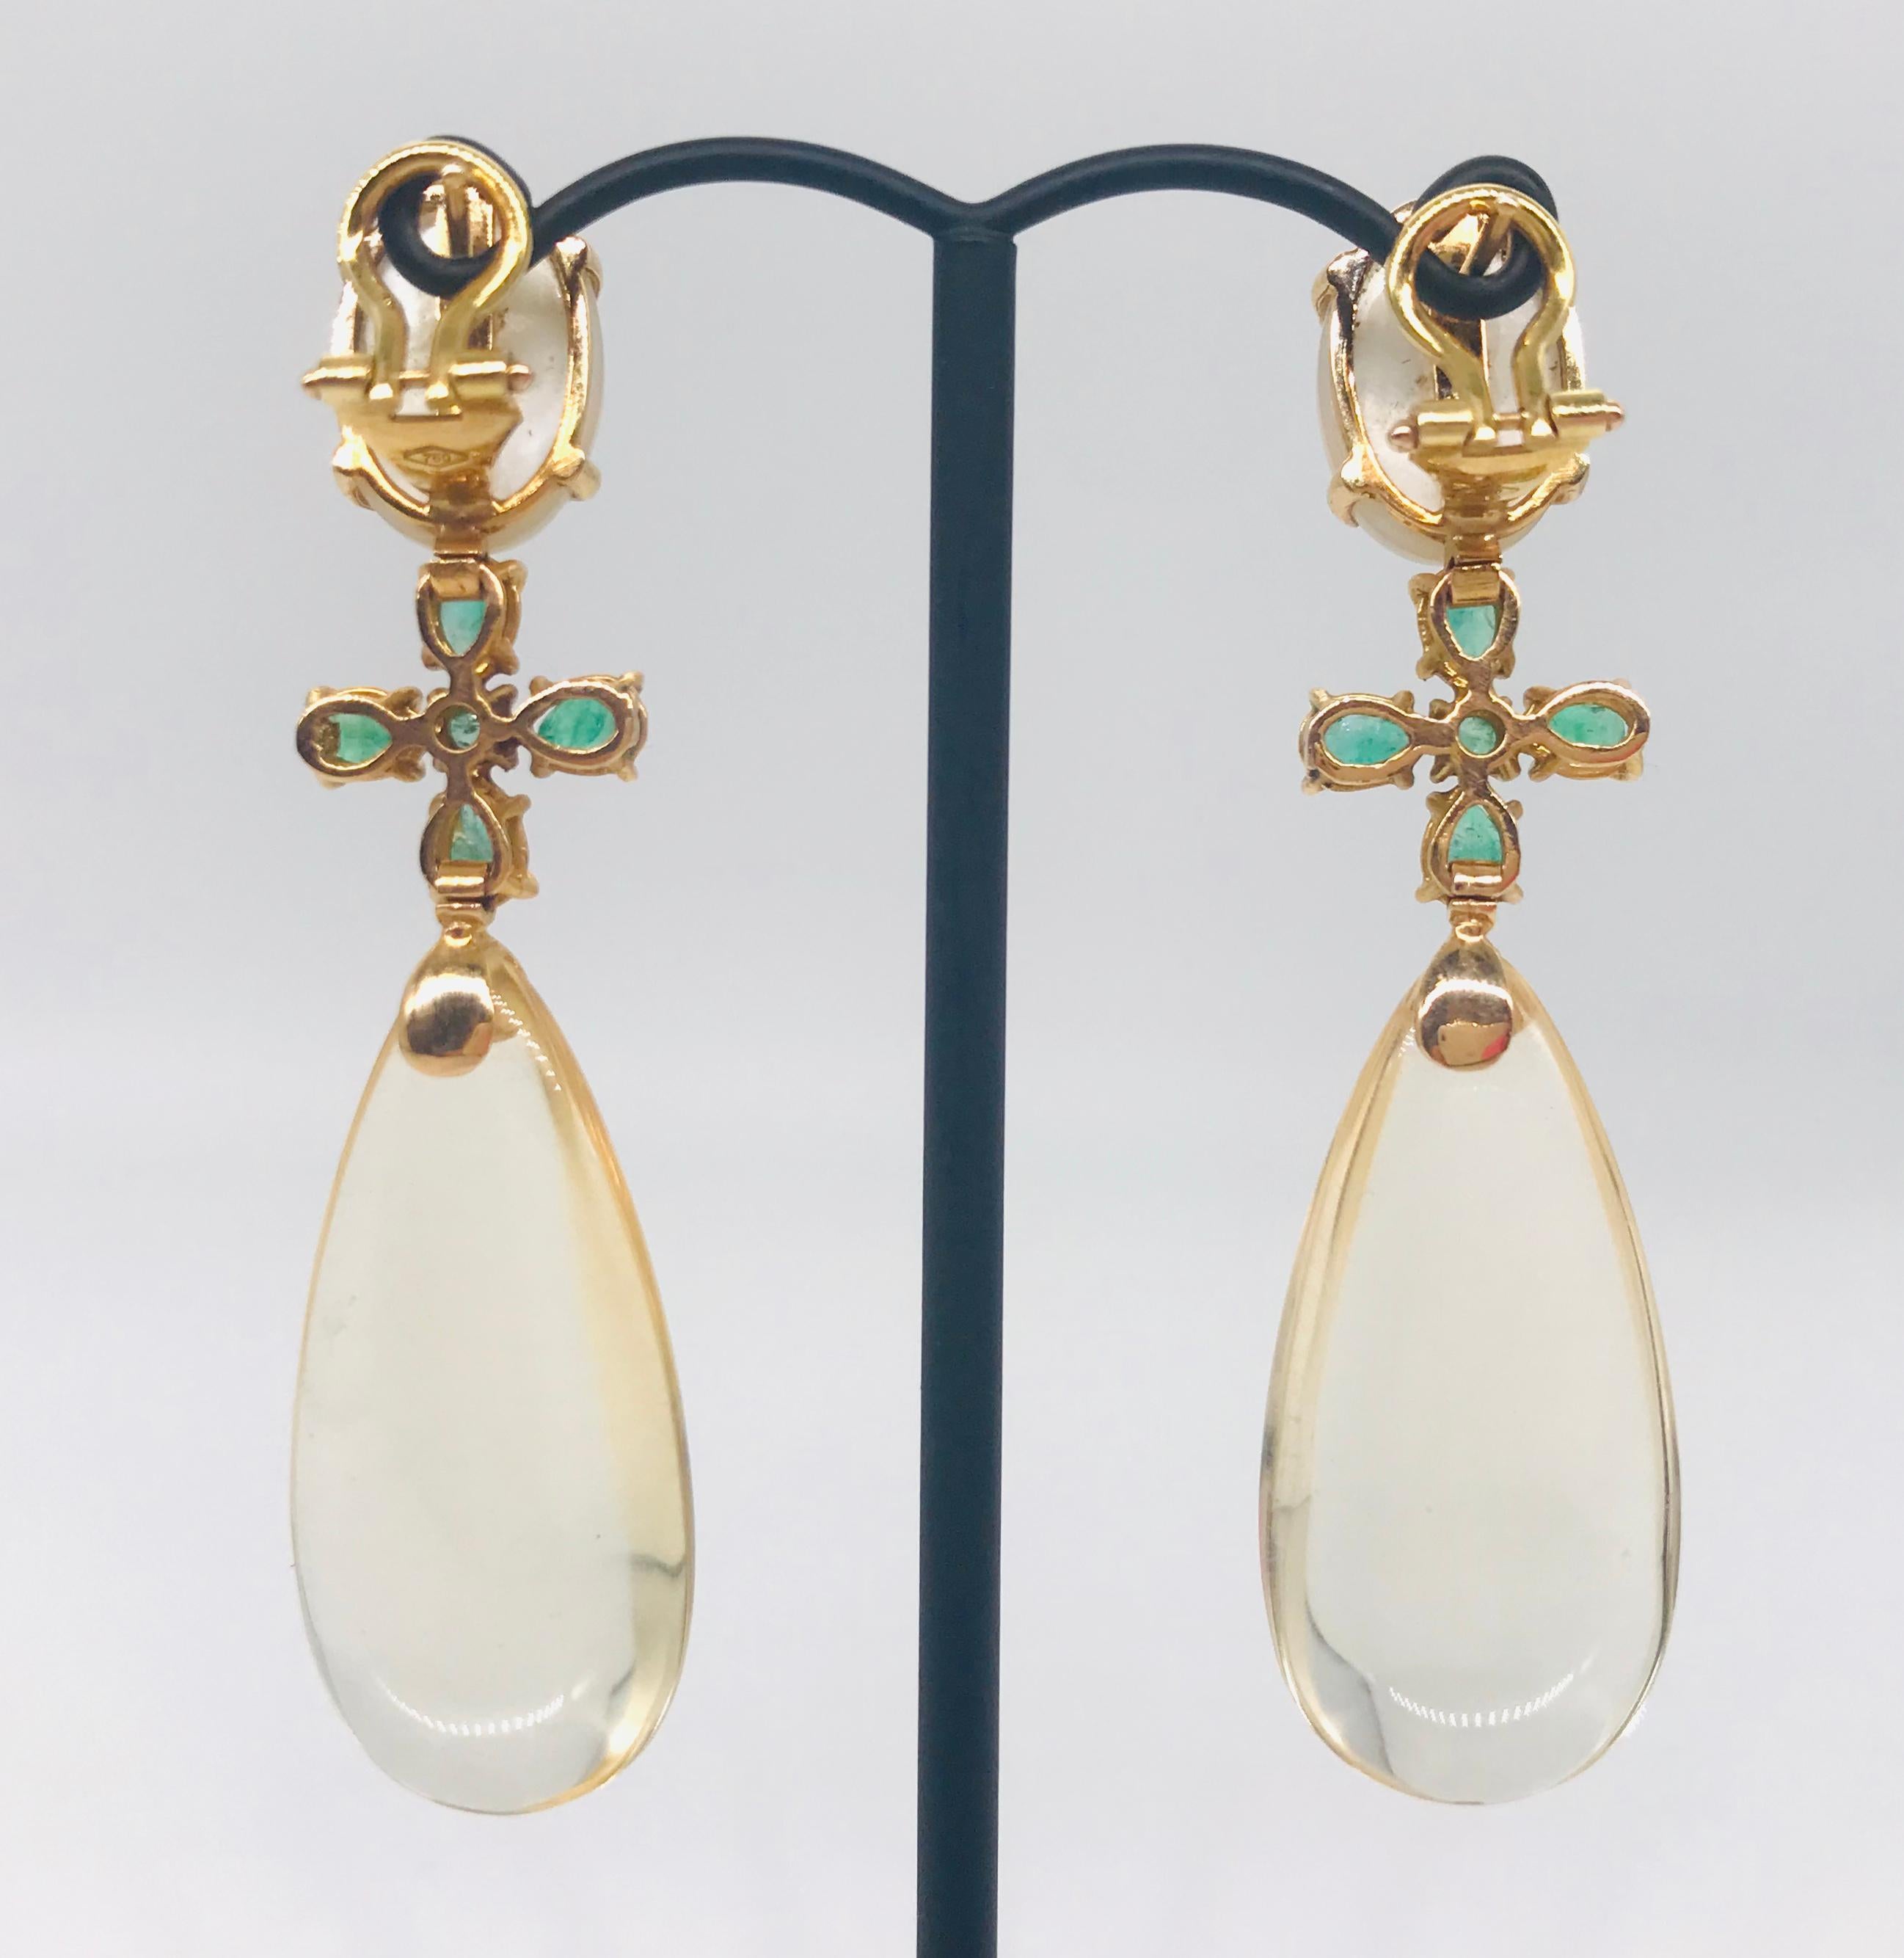 Round Cut Moonstones, Hydro Citrine and Emeralds on Yellow Gold 18k Chandelier Earrings